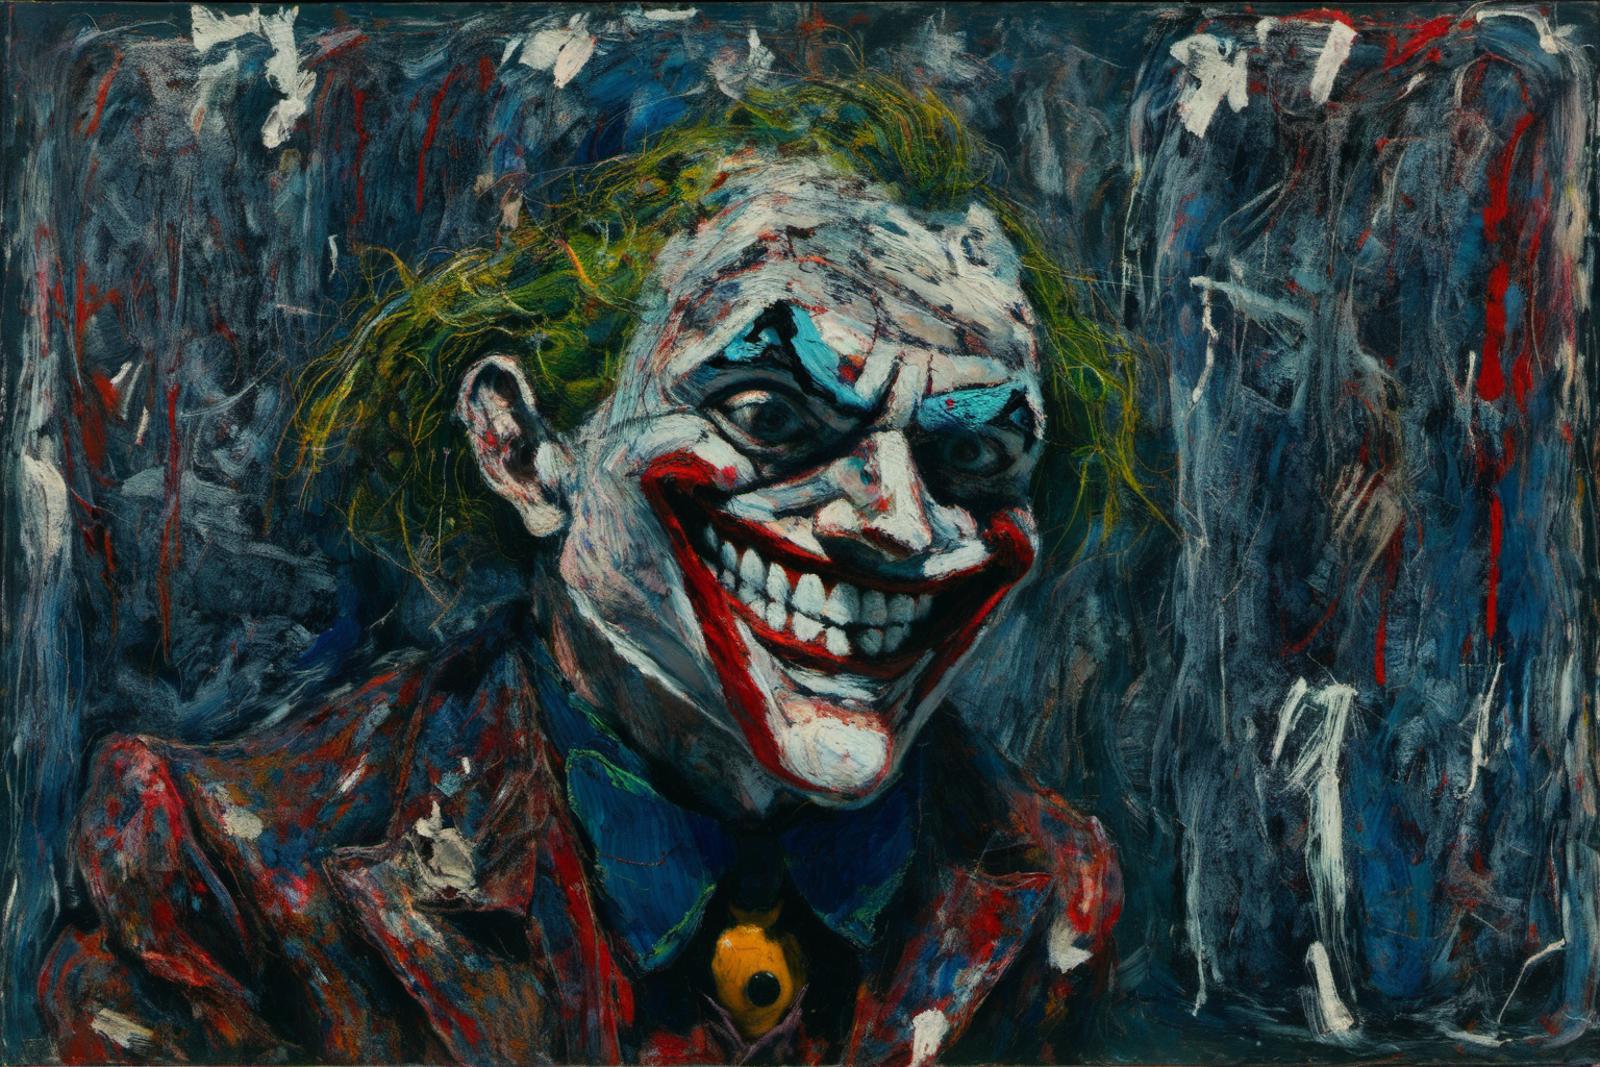 A painting of a man with clown makeup and a red jacket.